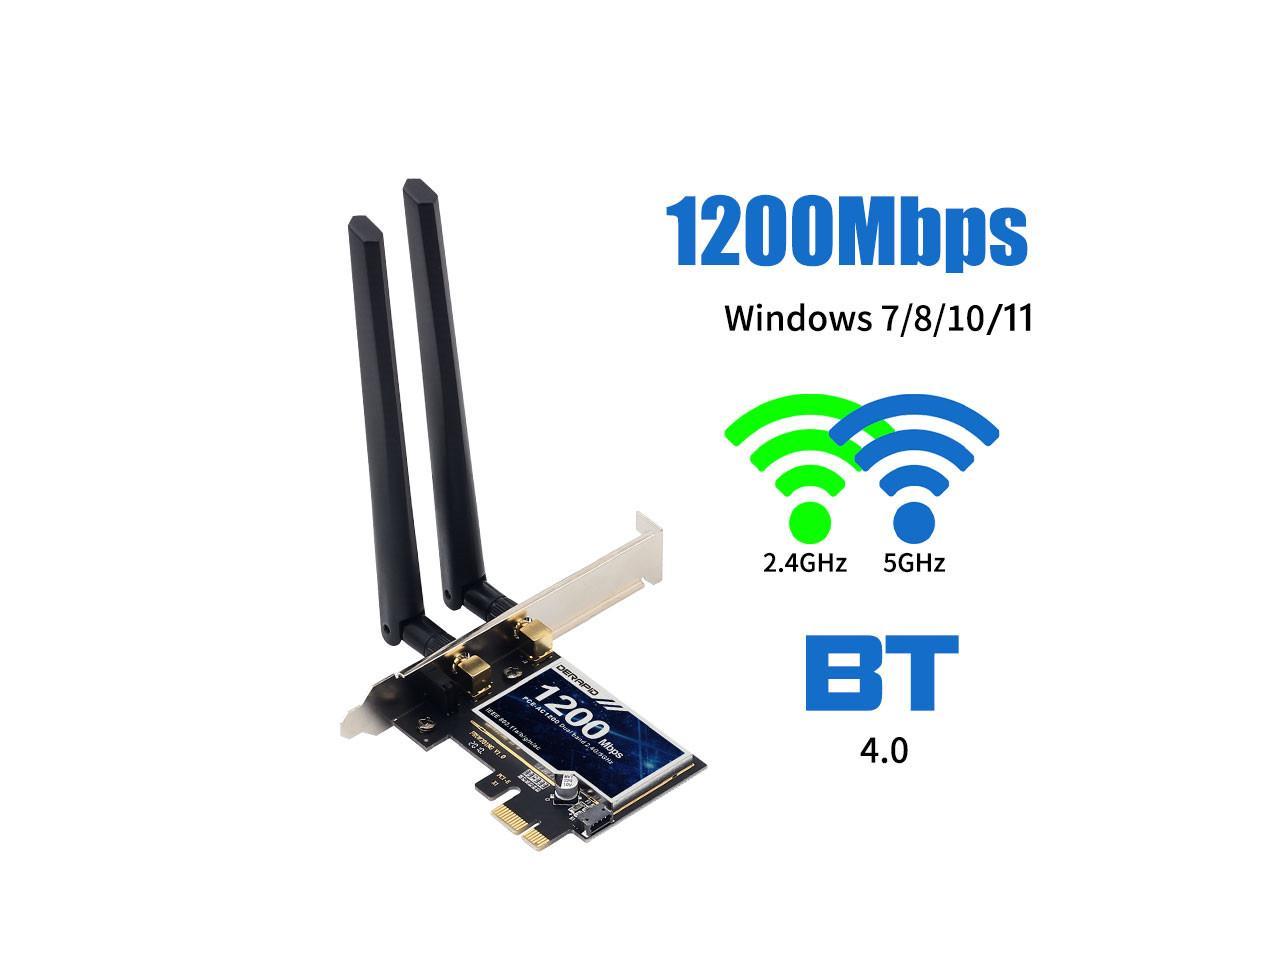 Demeras Practical Wireless Network Card Beautiful Network Card for PC 